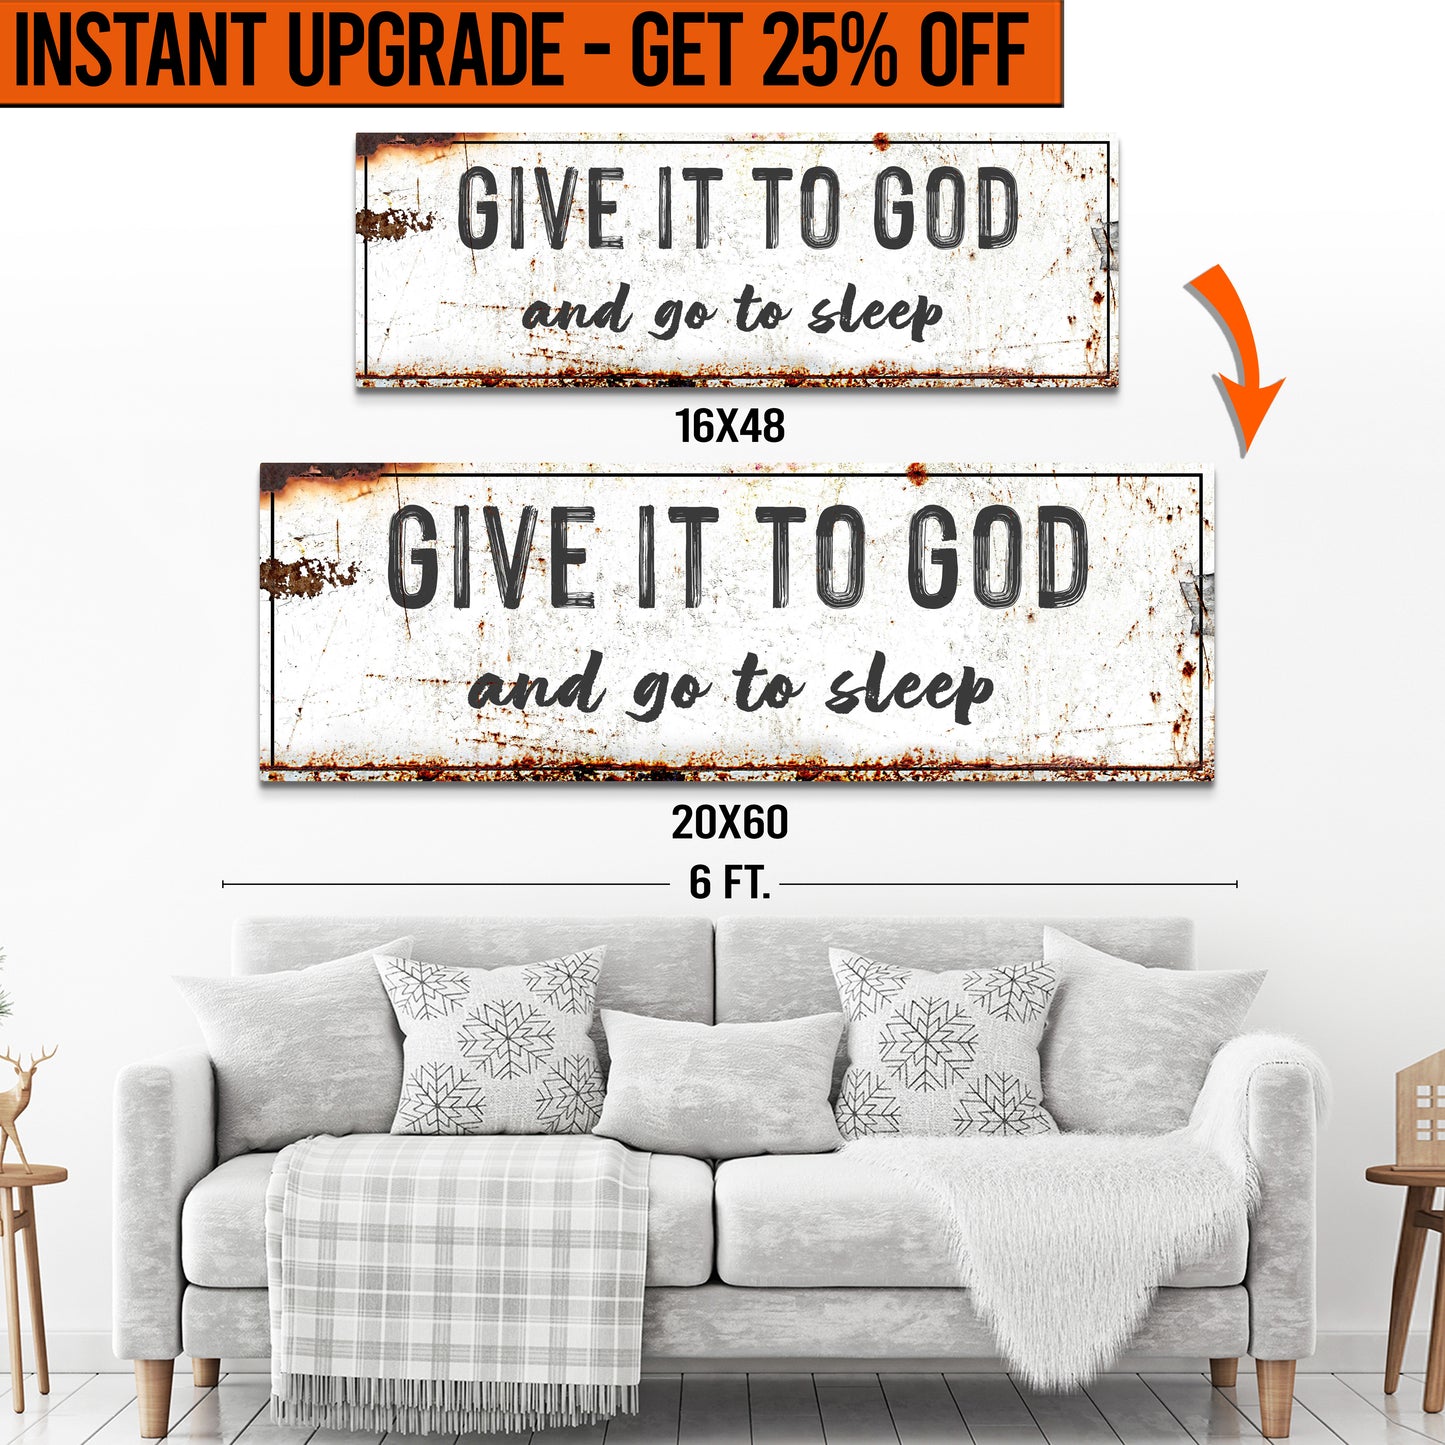 Upgrade Your 16x48 Inches 'Give it to God and Go to Sleep' (Style 1) Canvas To 20x60 Inches